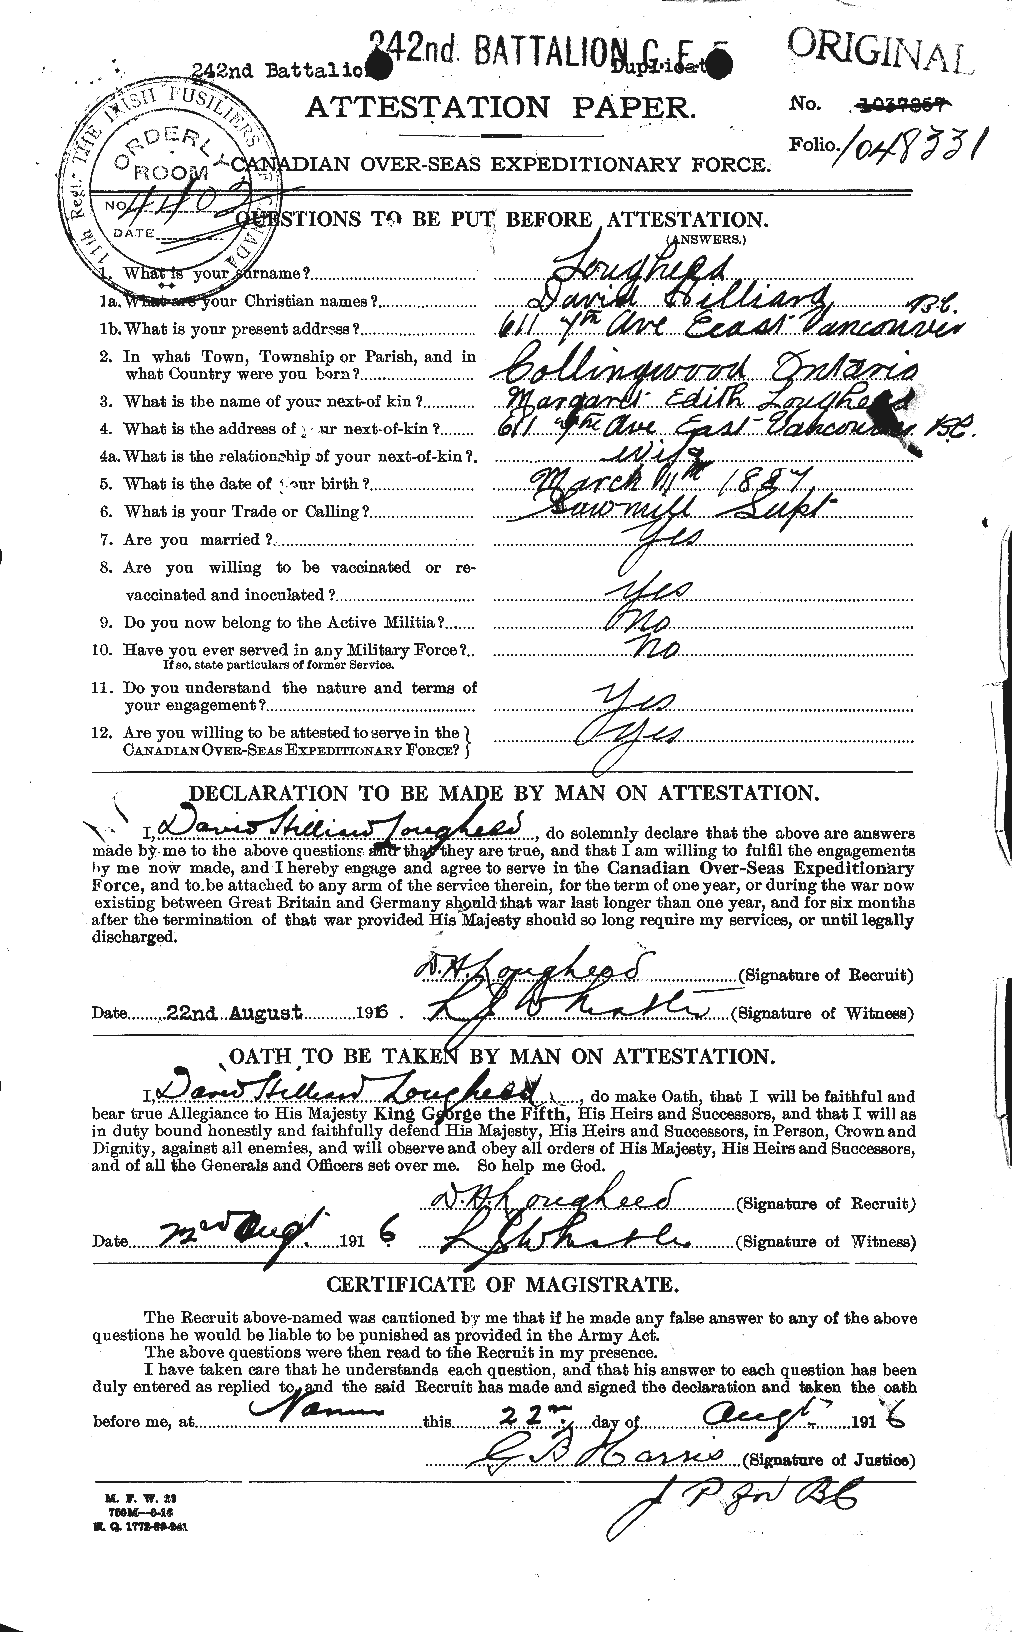 Personnel Records of the First World War - CEF 470390a